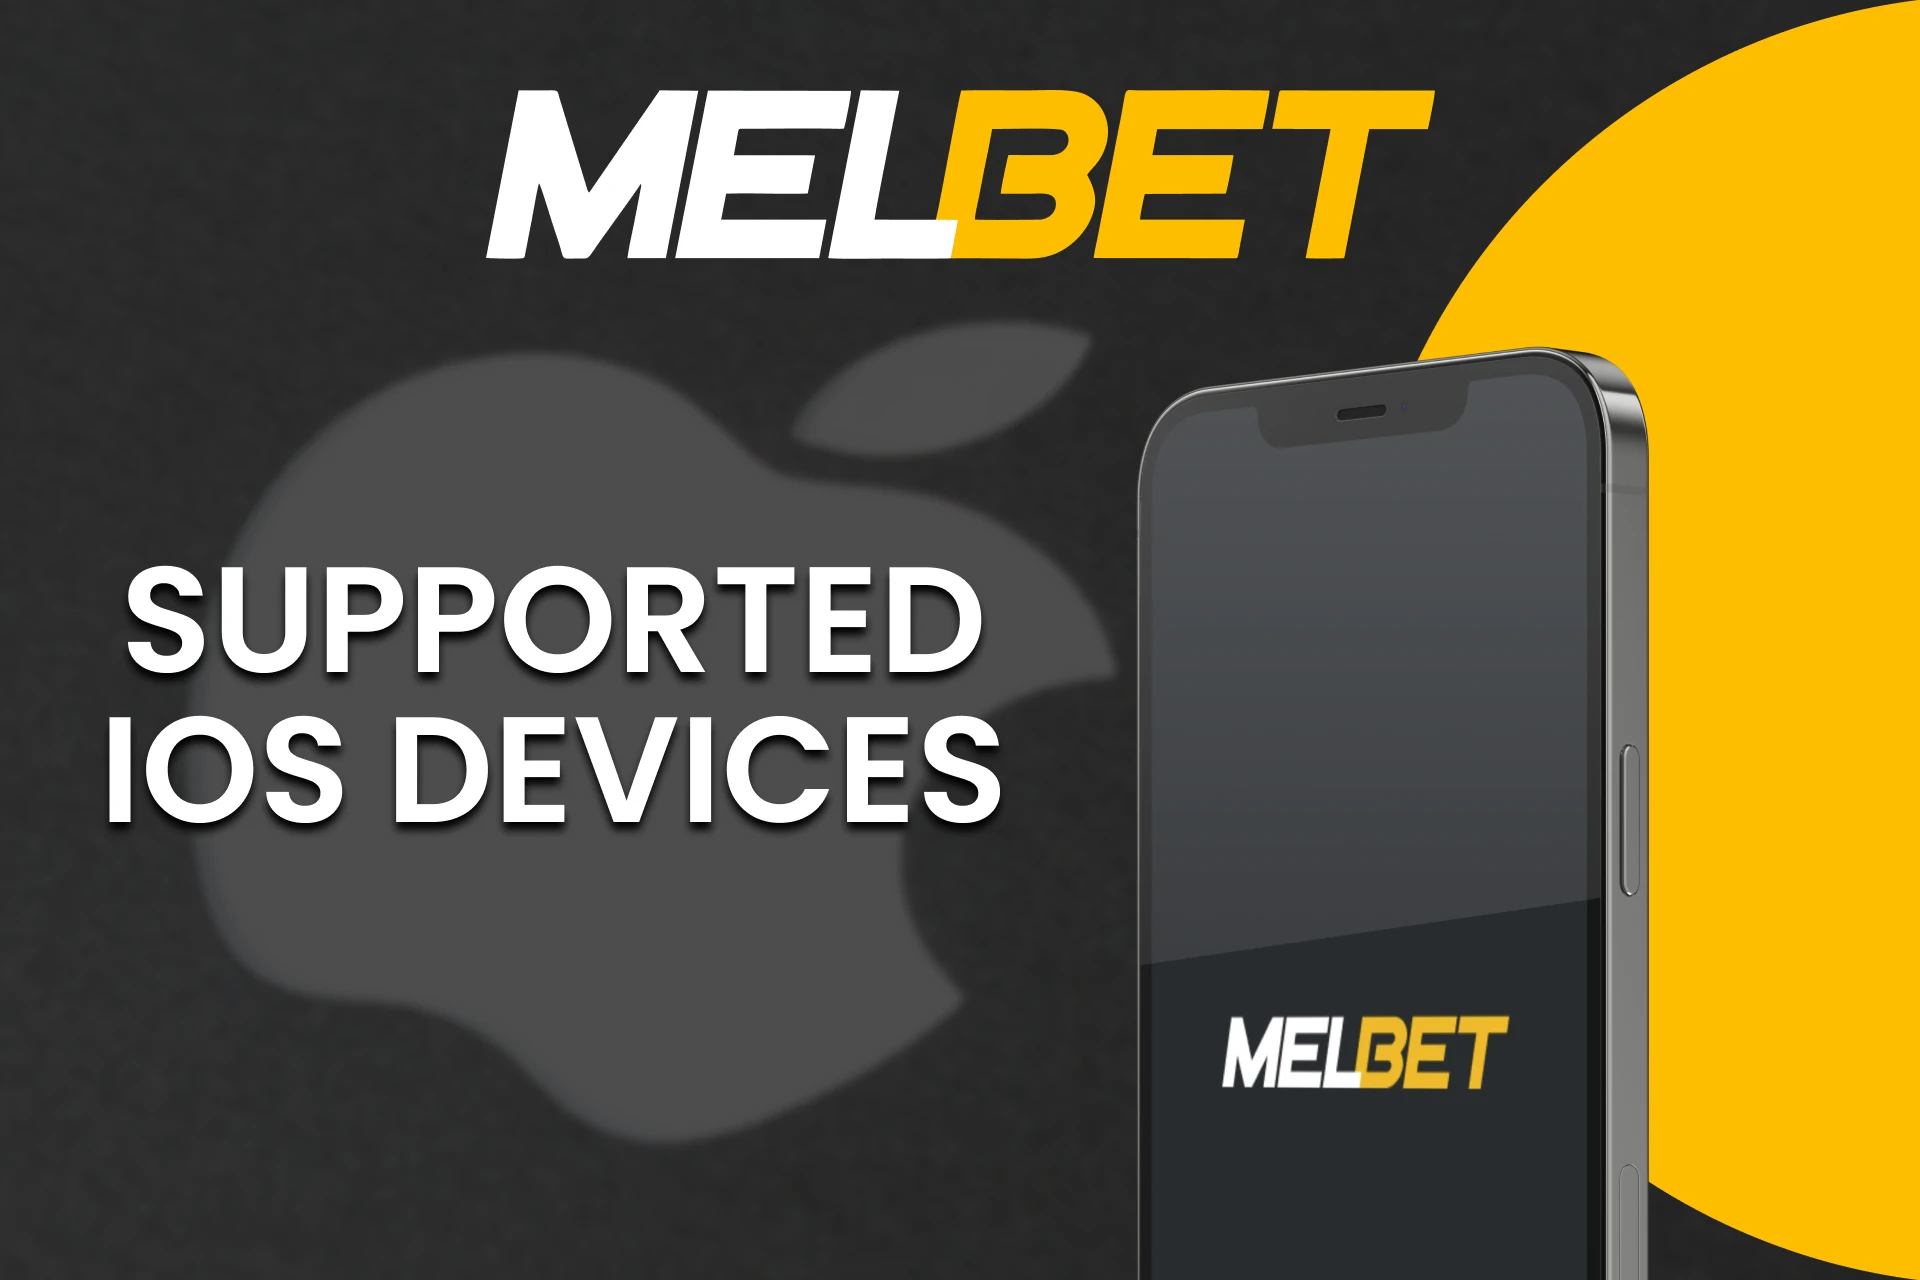 Use the Melbet service on your iOS device.